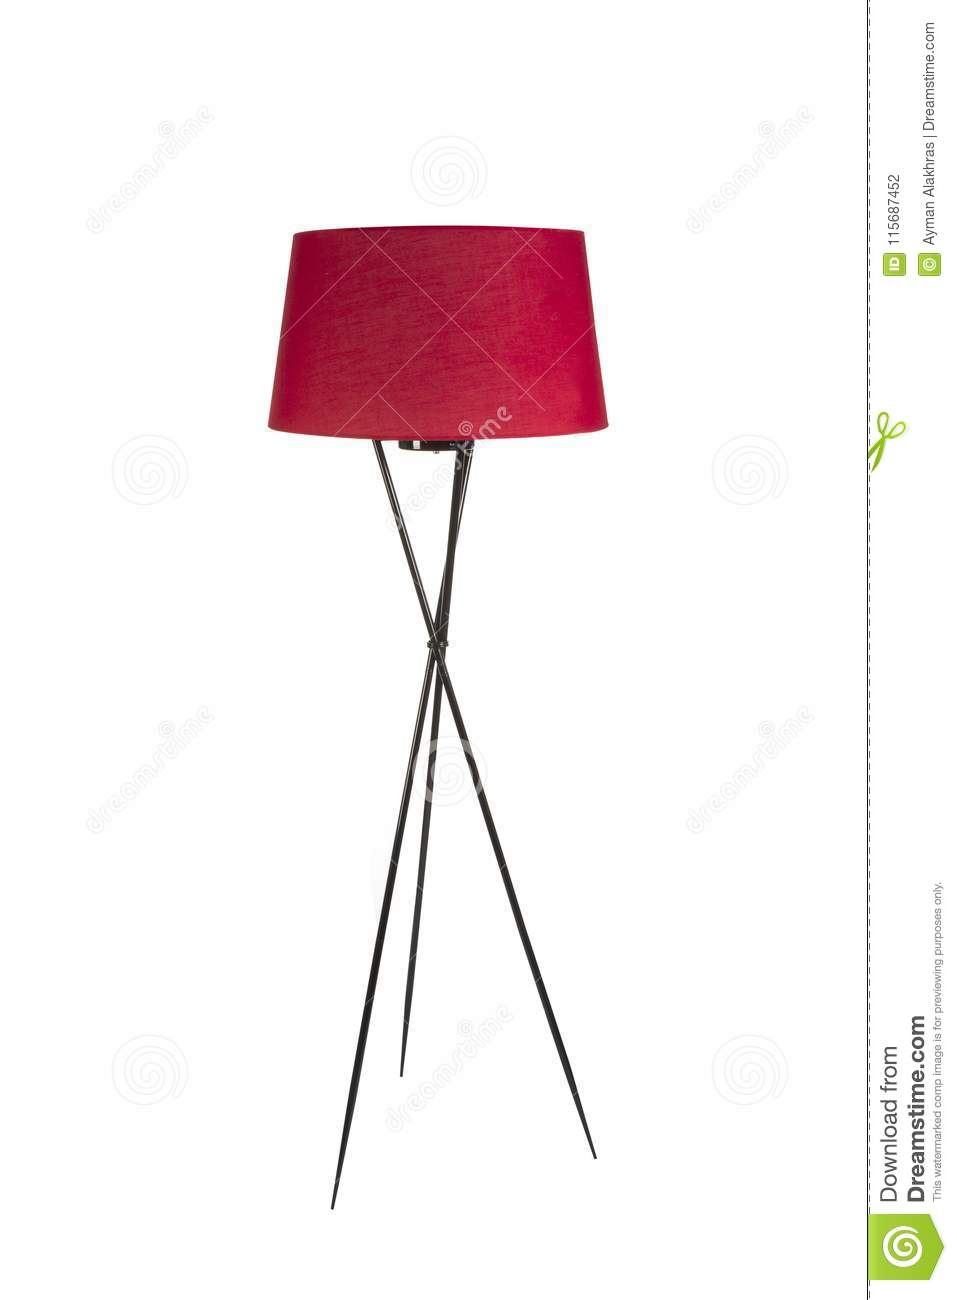 Tripod Red Floor Lamp On White Background Stock Photo throughout size 957 X 1300